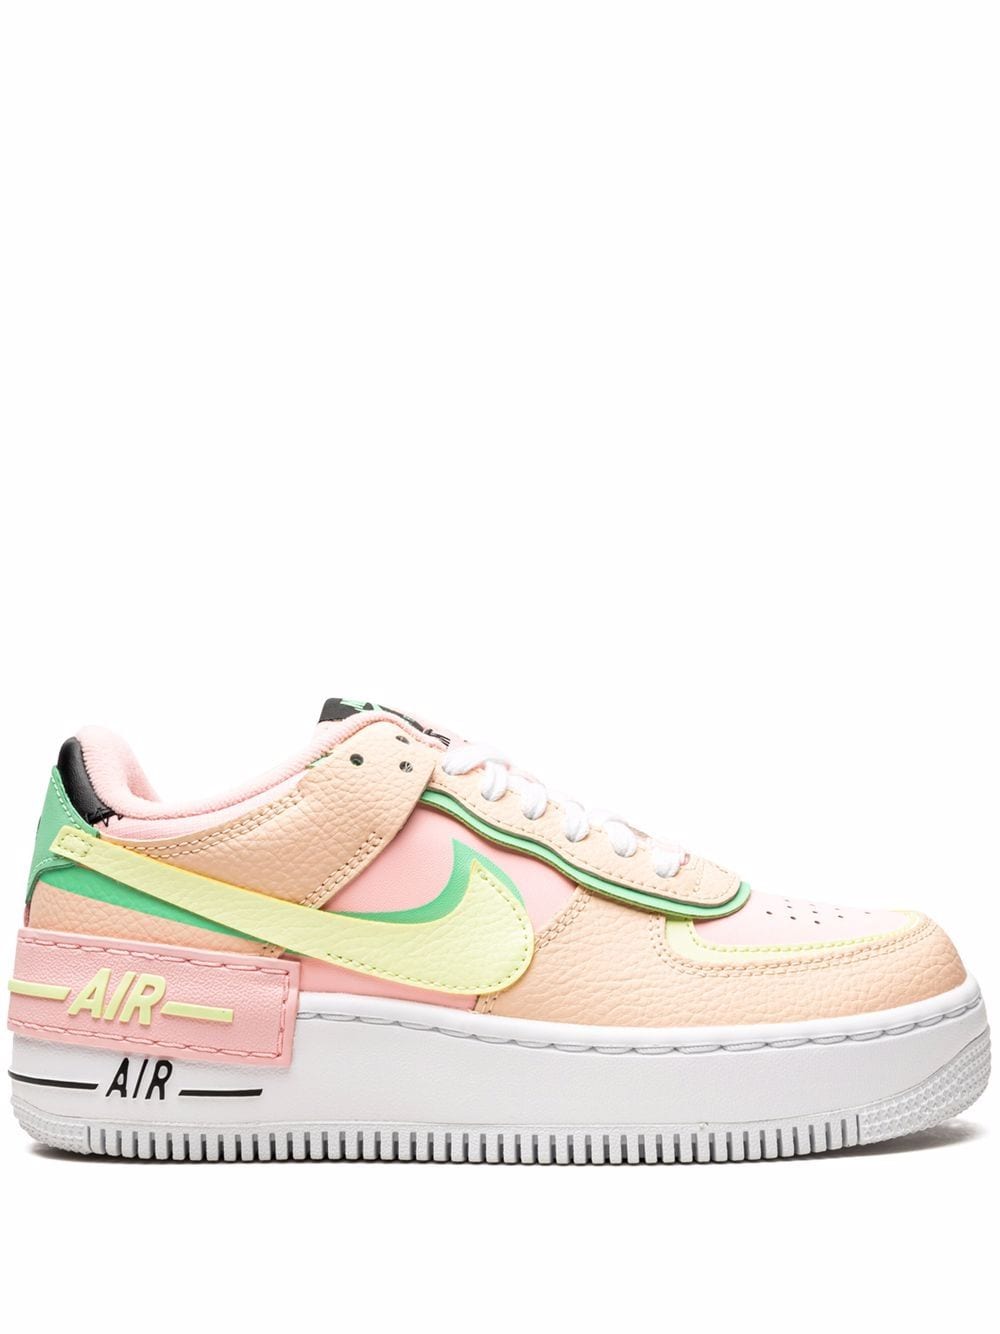 Nike Air Force 1 Shadow "Arctic Punch" sneakers - Pink von Nike